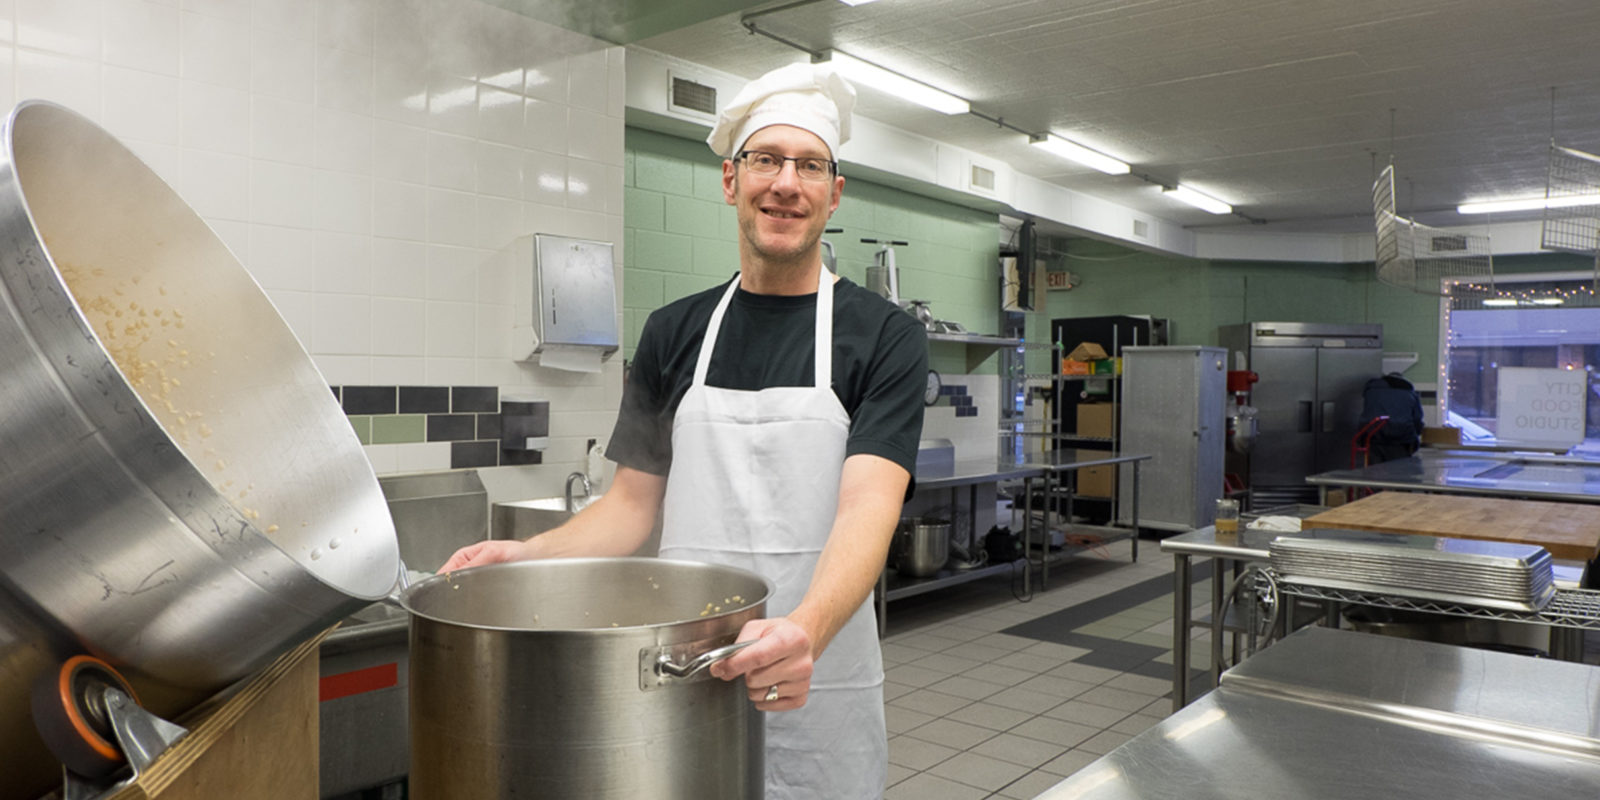 A photo of someone in a kitchen with a large pot